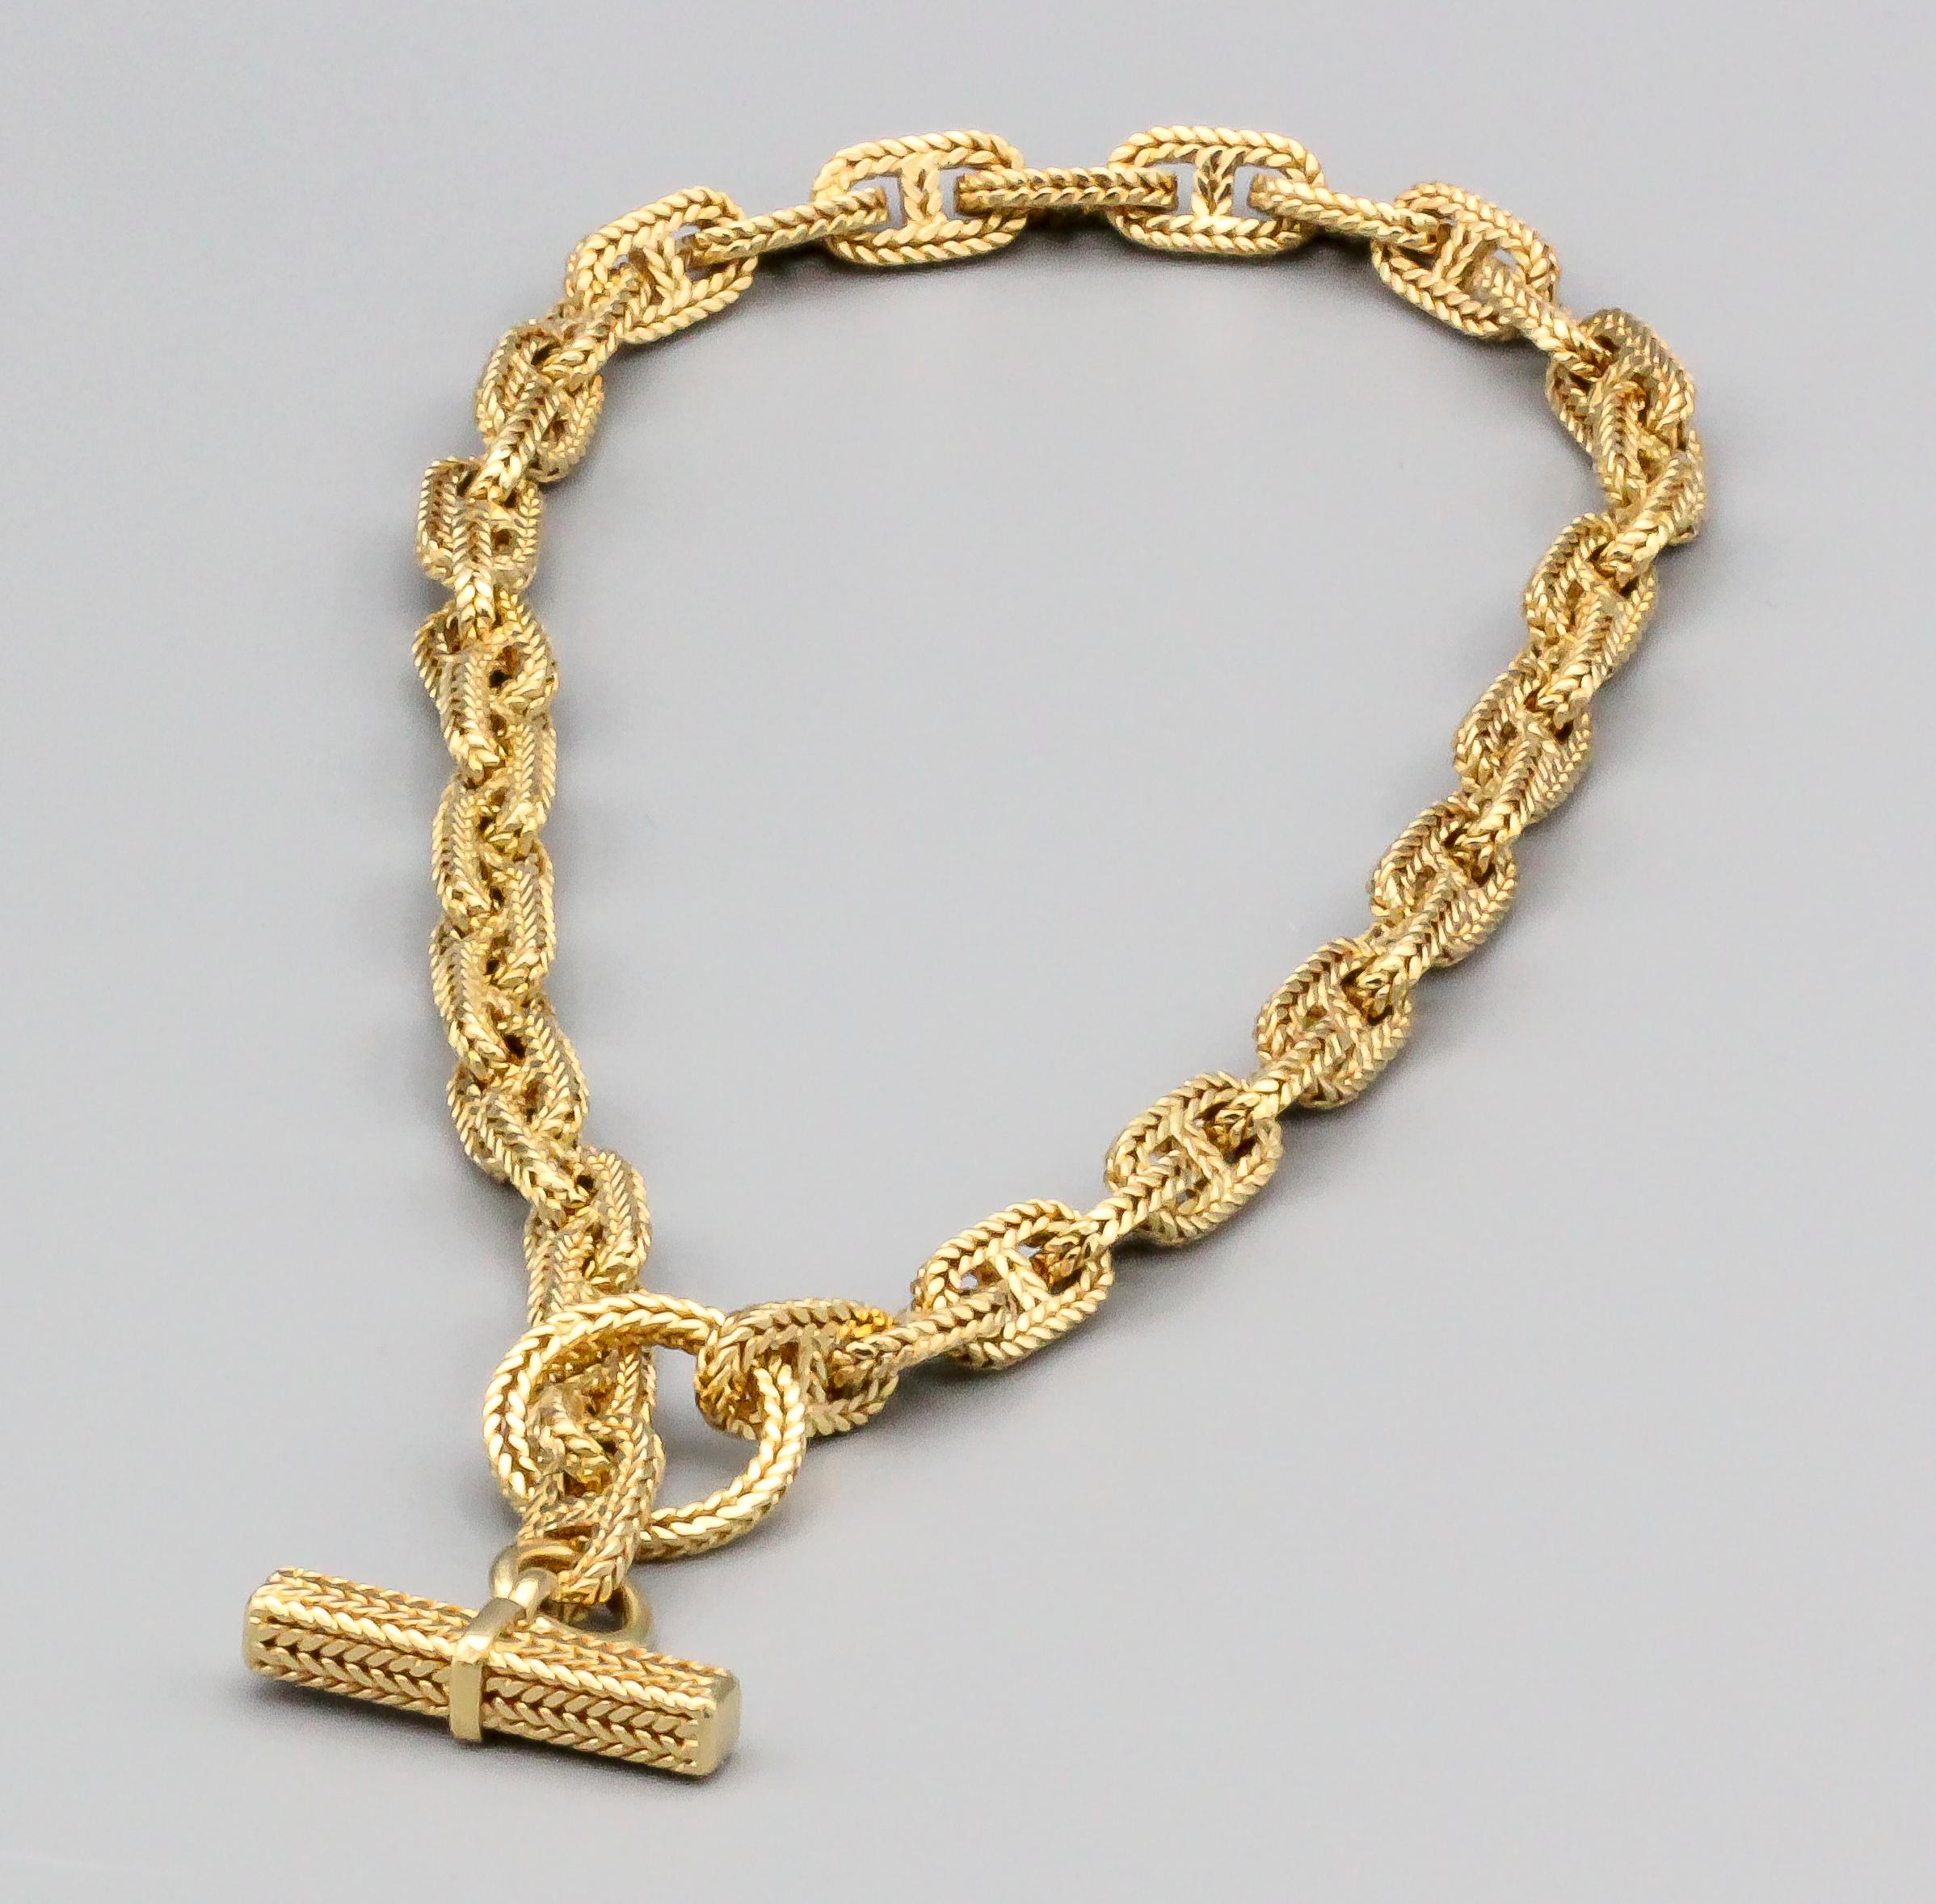 Rare 18K yellow gold braided toggle link necklace from the 